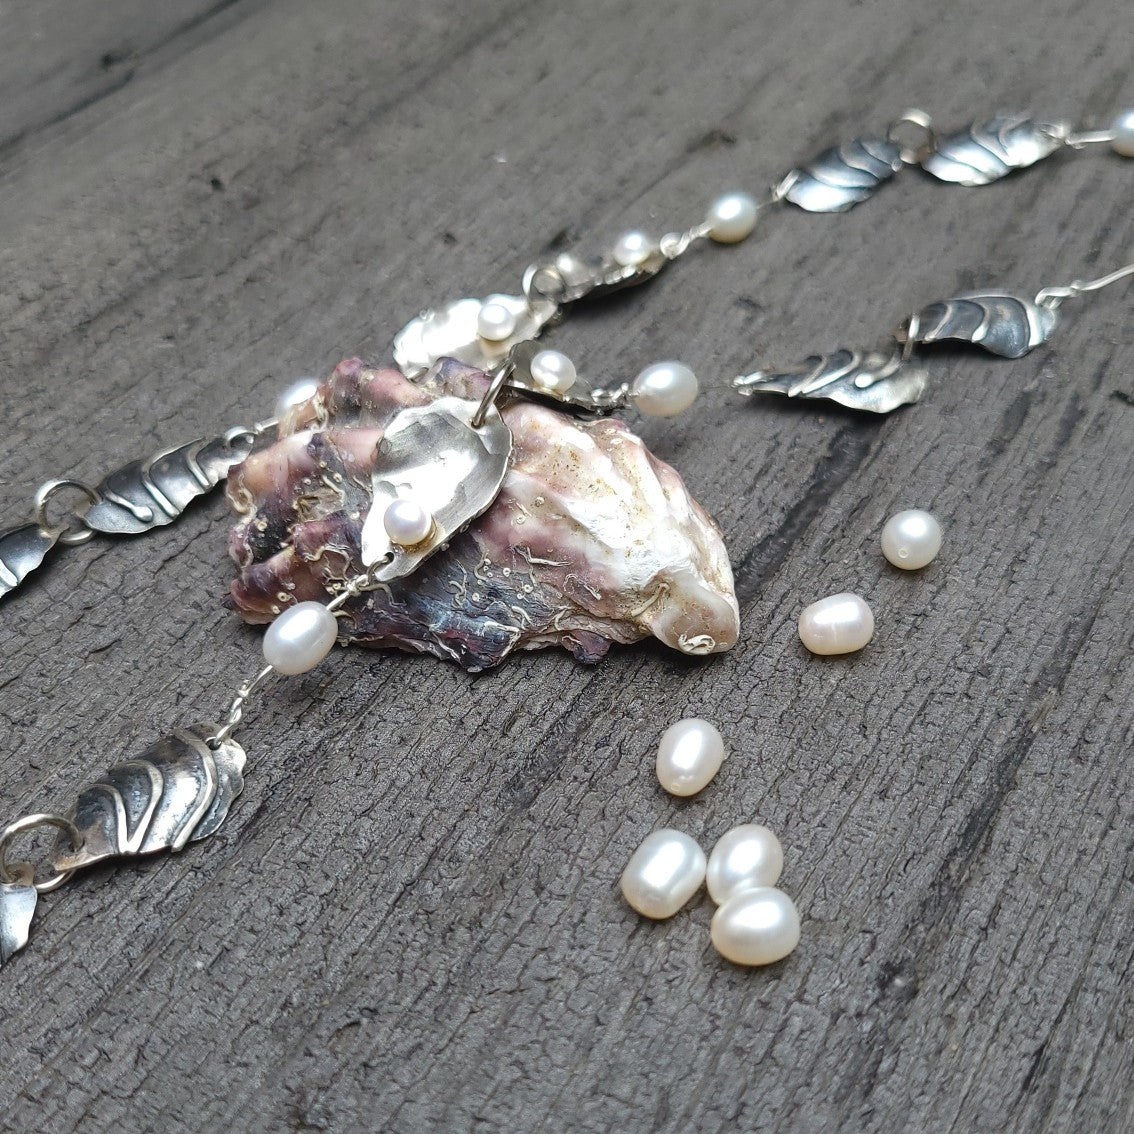 Oyster shells with pearls necklace